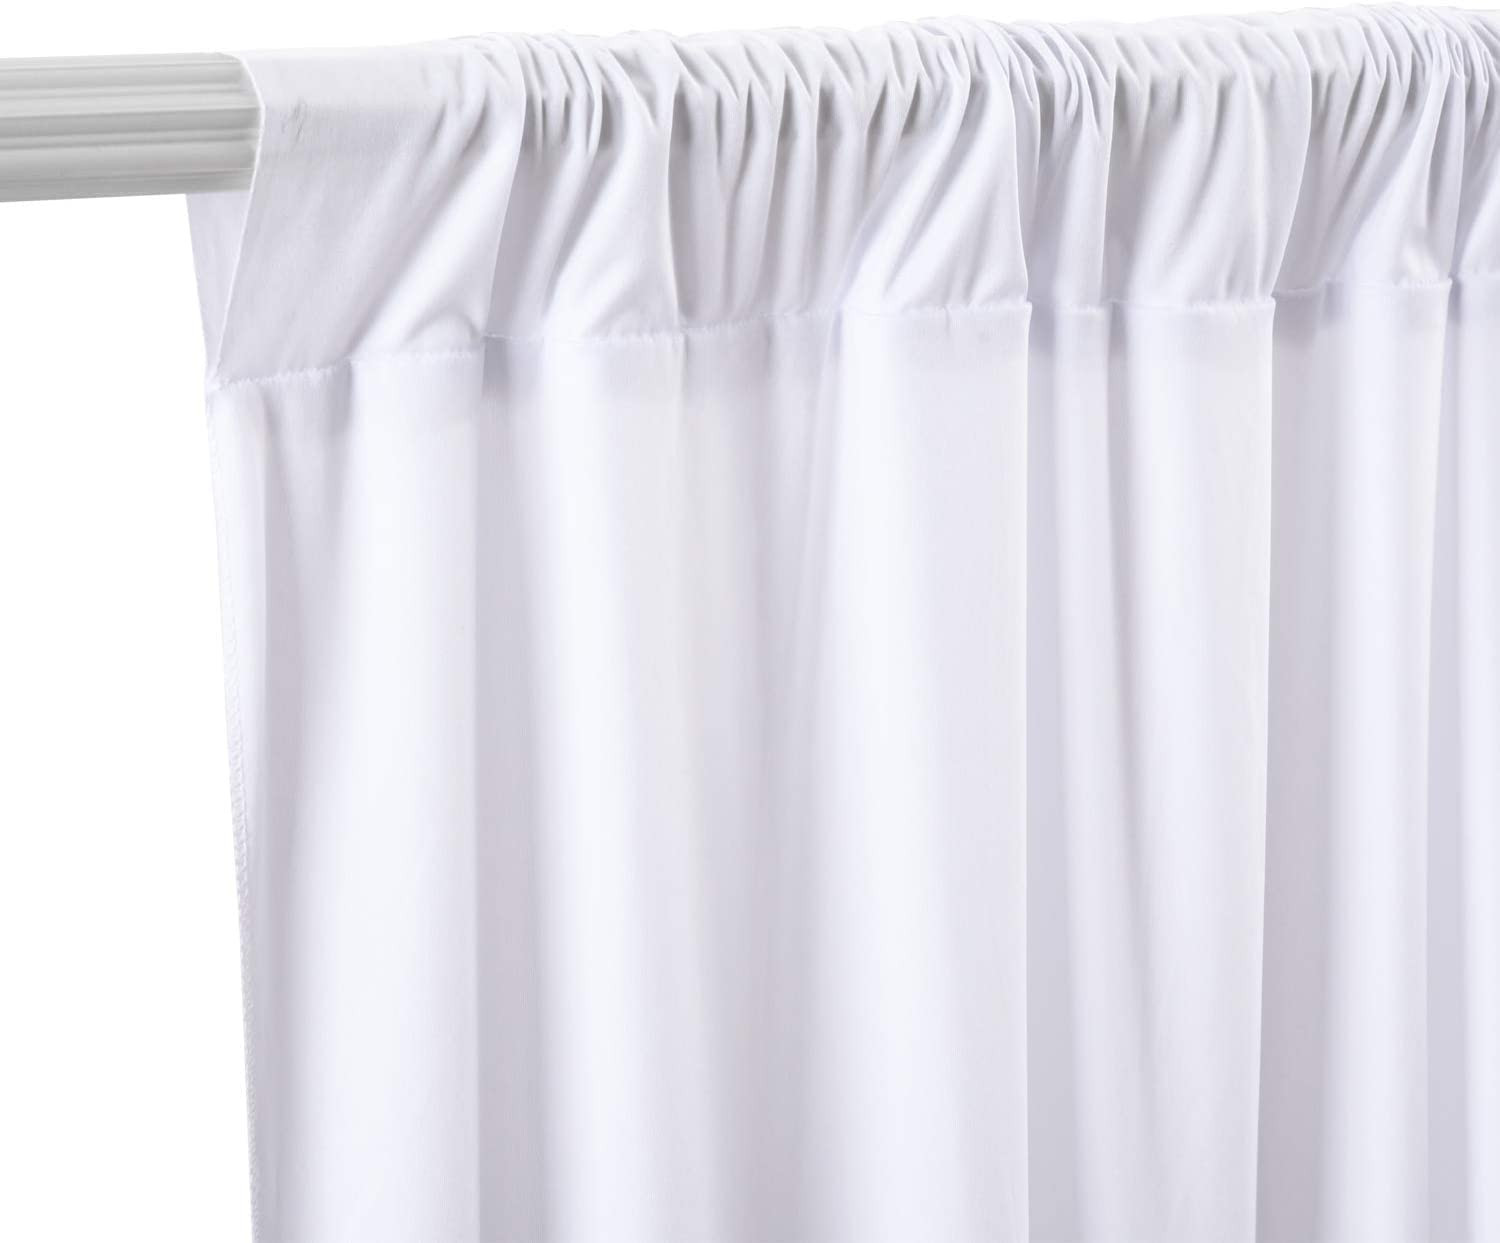 Boltove® White Wrinkle Free Decoration Backdrop Curtain Drapes White Backdrop Panels Background for Photography Wedding Parties Birthday Anniversary Function | Set of 2 |